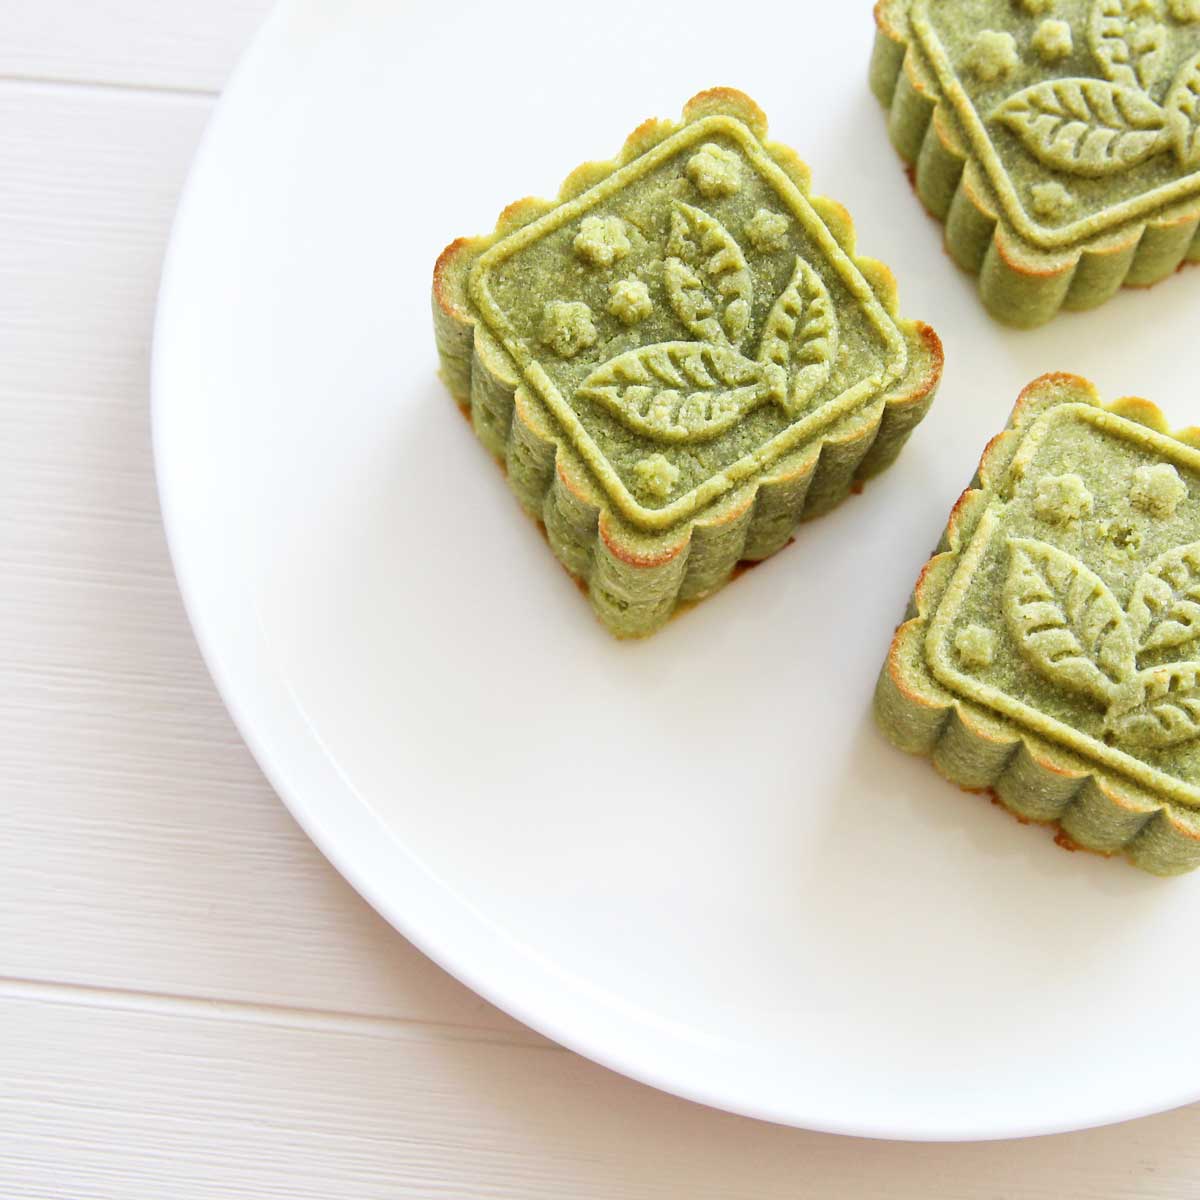 Easy Vegan Matcha Mooncakes Recipe with Almond Paste Filling (Gluten-Free) - zucchini yeast bread